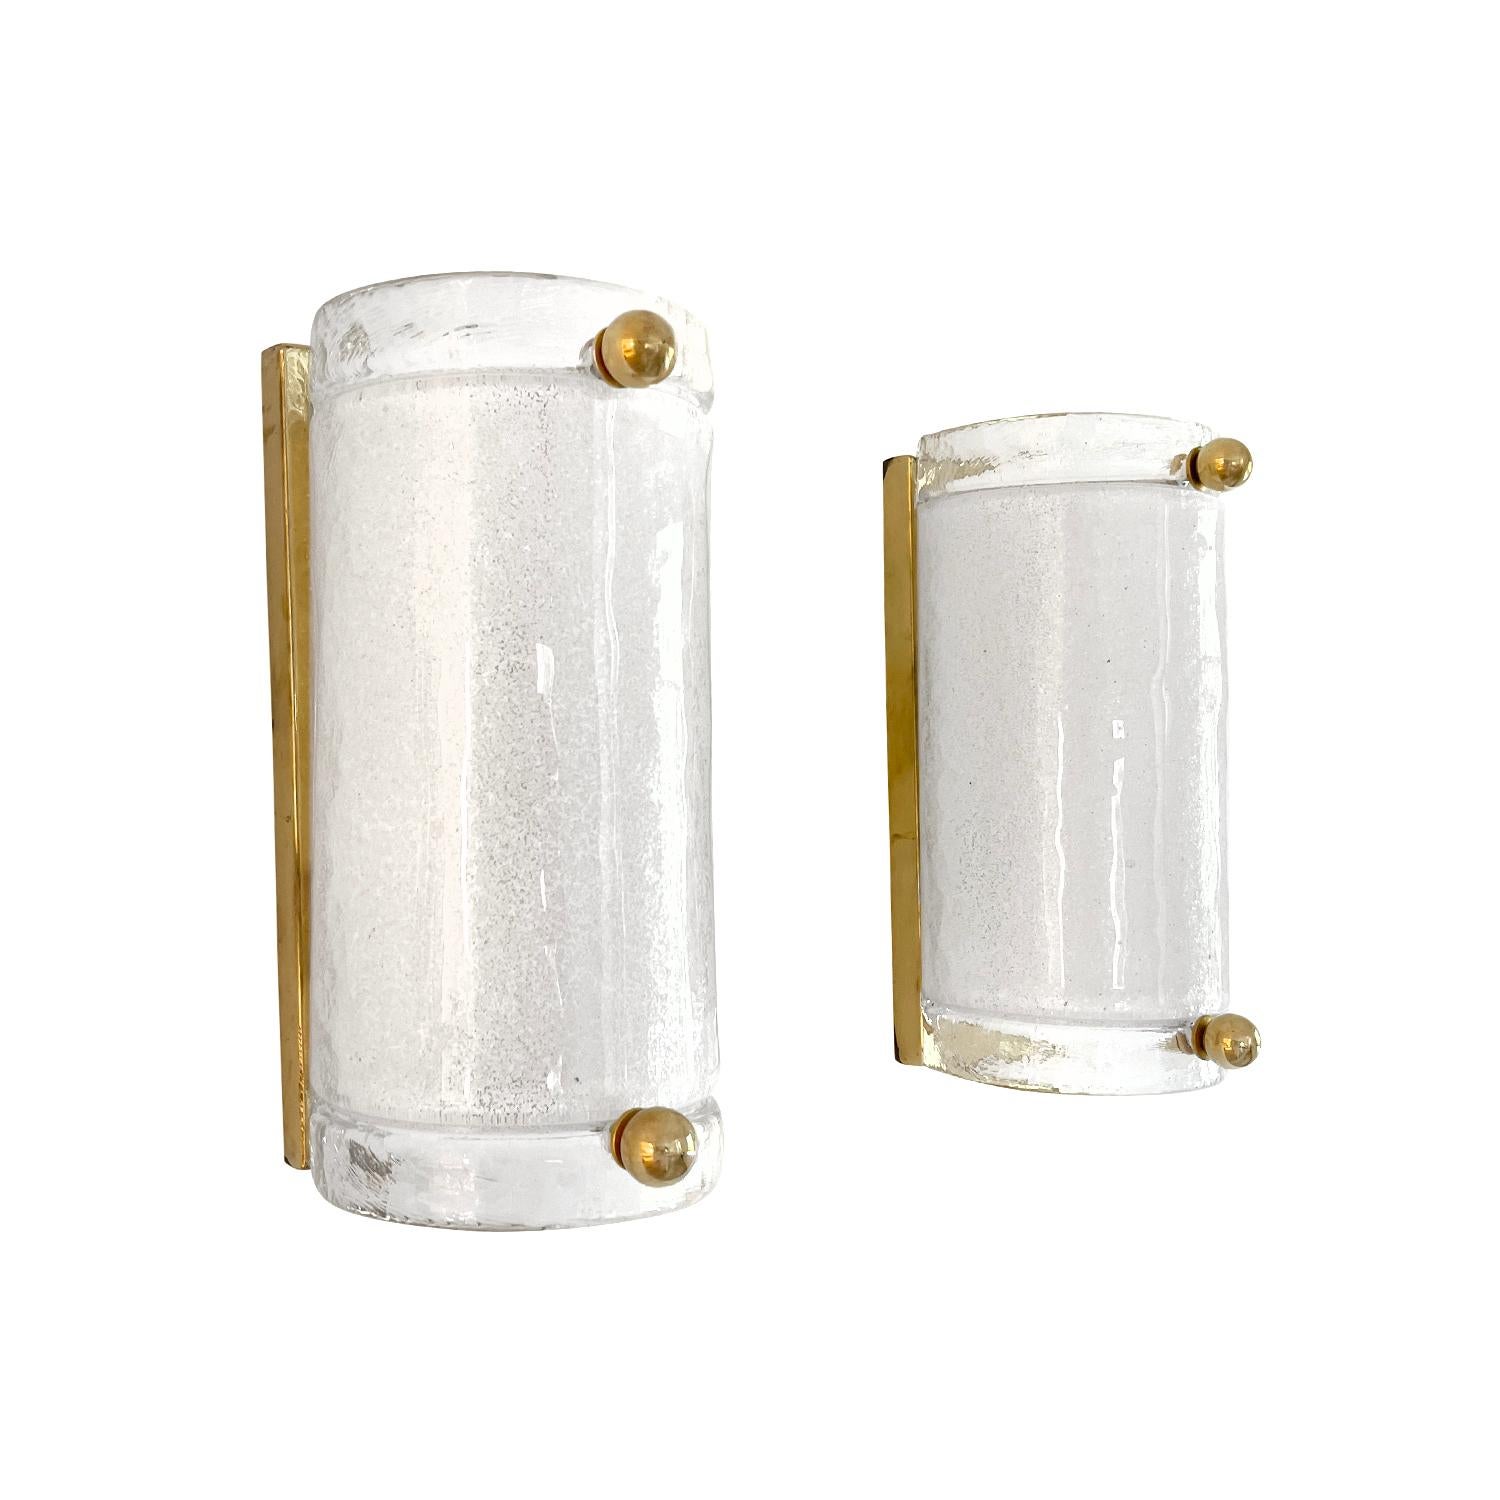 A small, vintage Mid-Century Modern Italian pair of wall sconces made of hand blown Murano glass Sommerso, supported by a brass structure, each of the wall lights features a two light socket, in good condition. The wires have been renewed. Wear